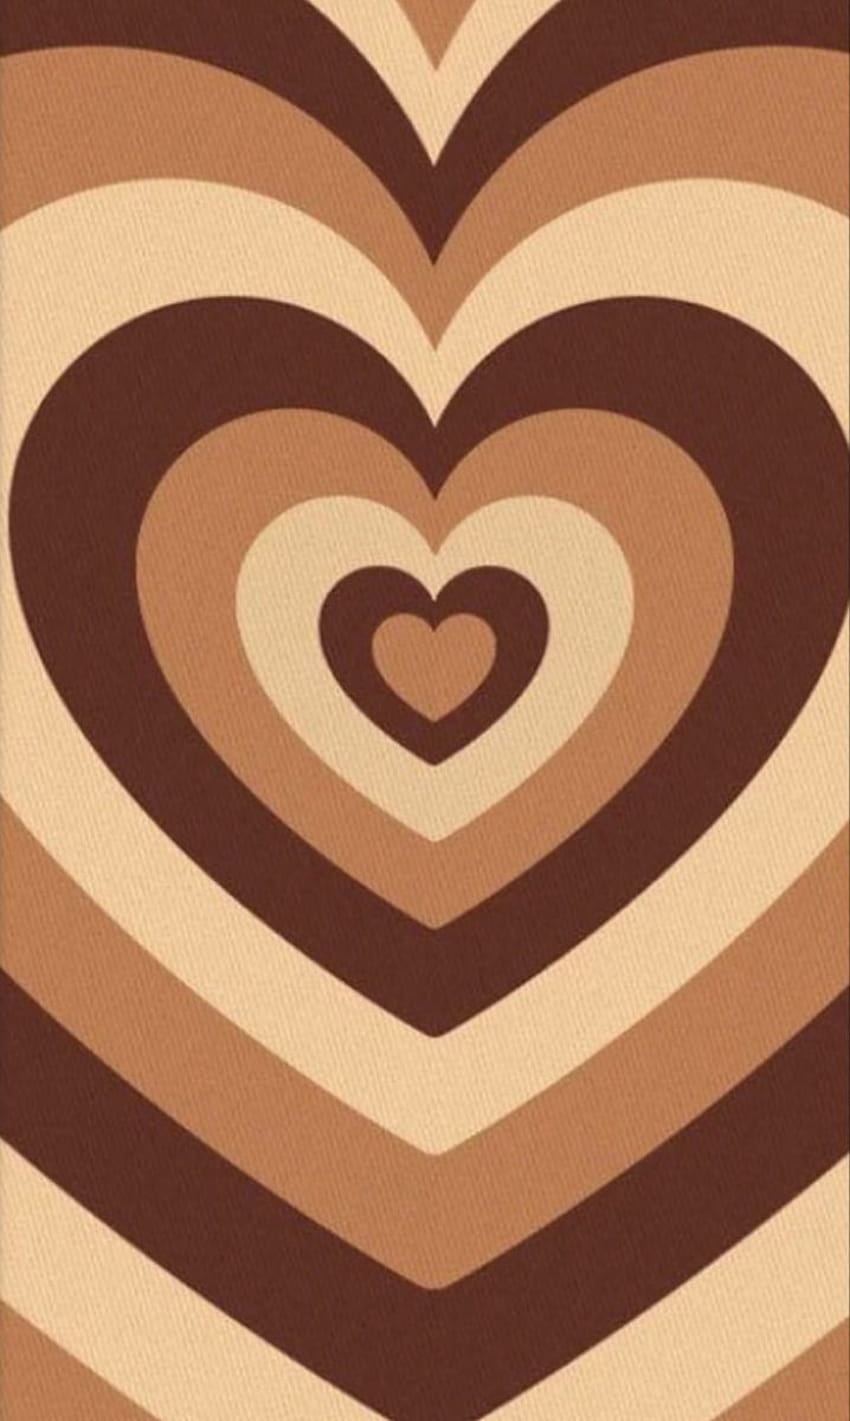 Pin on Phone cases designs, brown hearts HD phone wallpaper